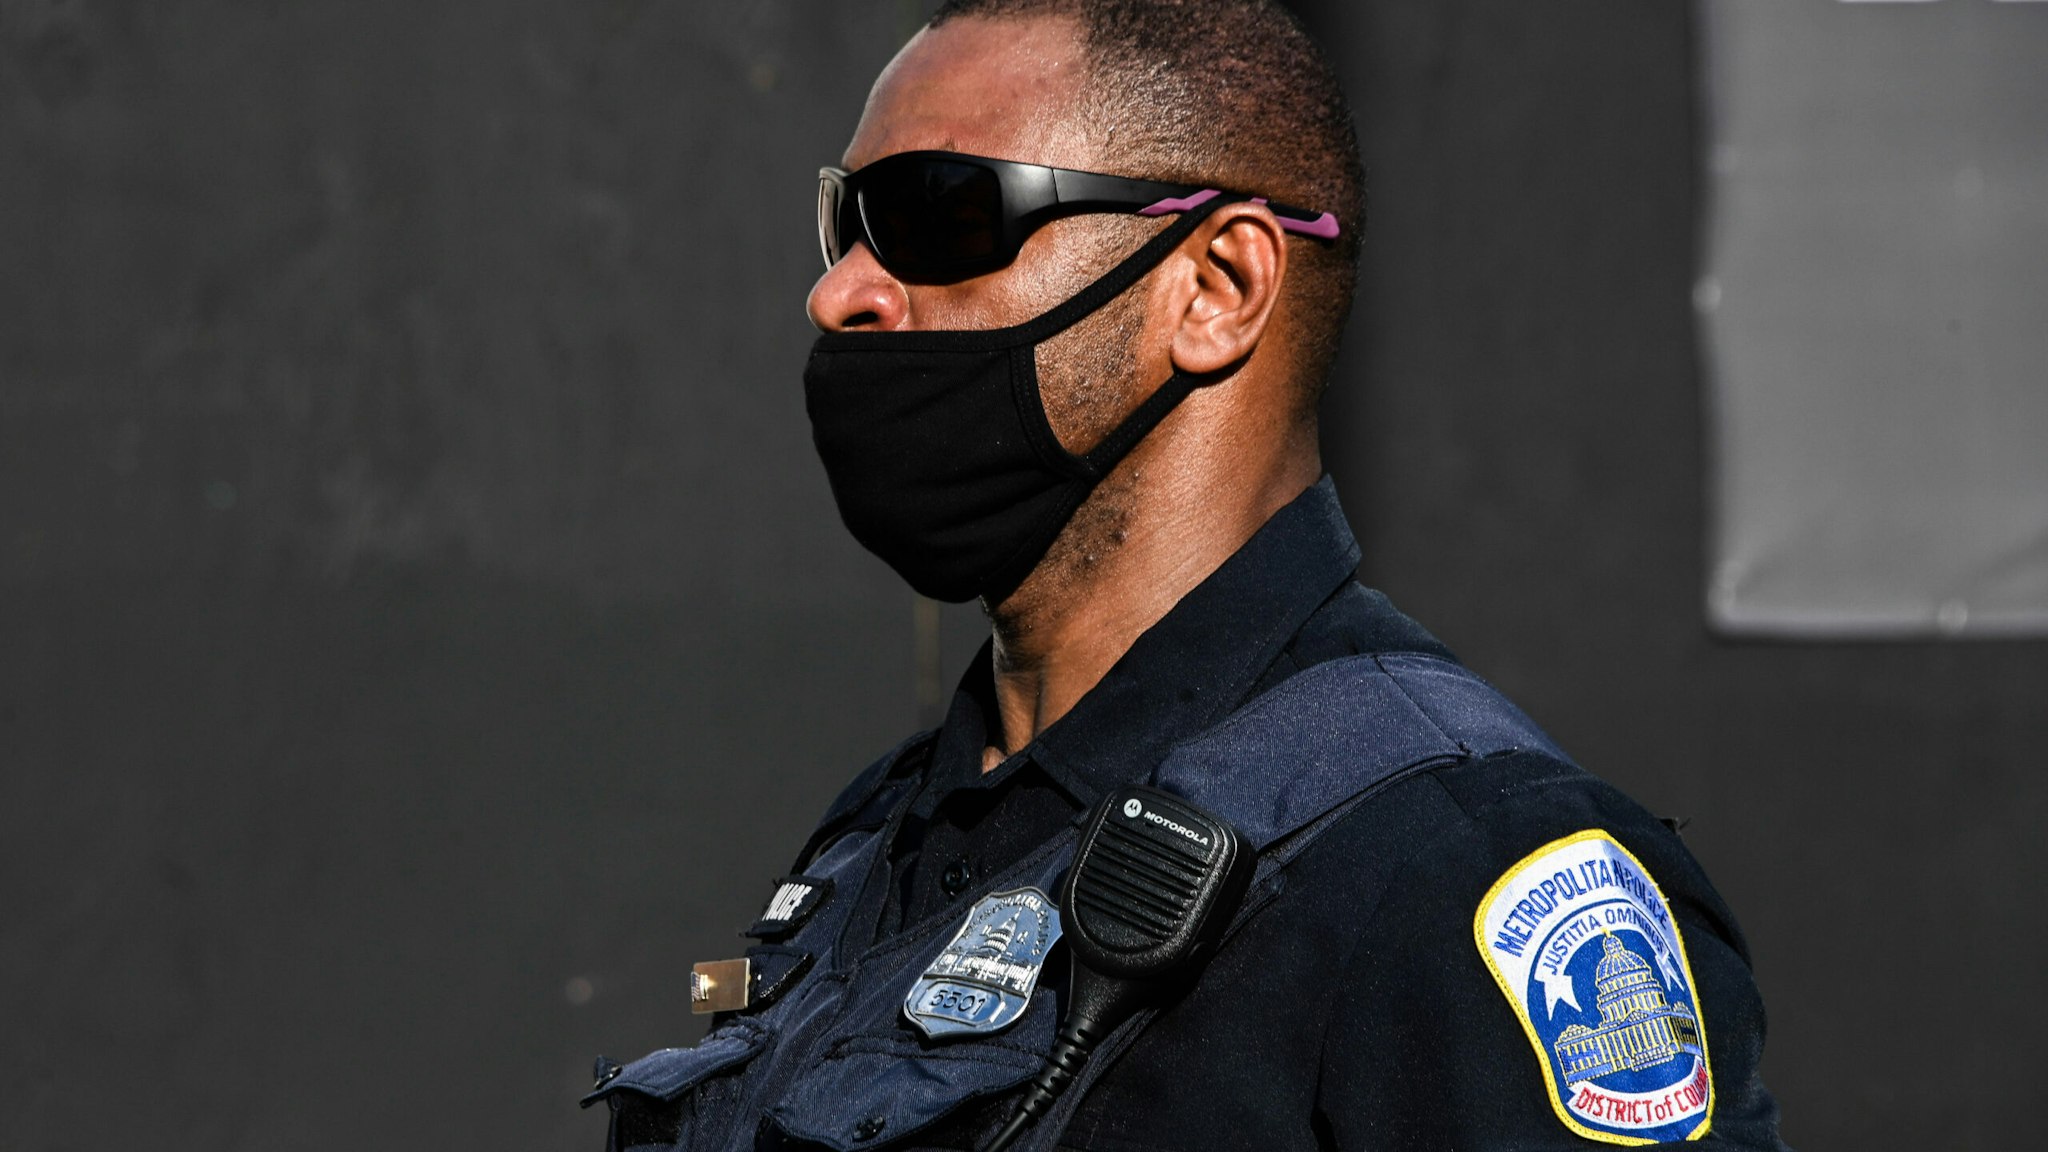 WASHINGTON, UNITED STATES - 2020/06/23: A police officer stands on guard at the Black Lives Matter Plaza during the demonstration. Tensions were high after Black Lives Matter protesters worked to remove the Andrew Jackson statue.